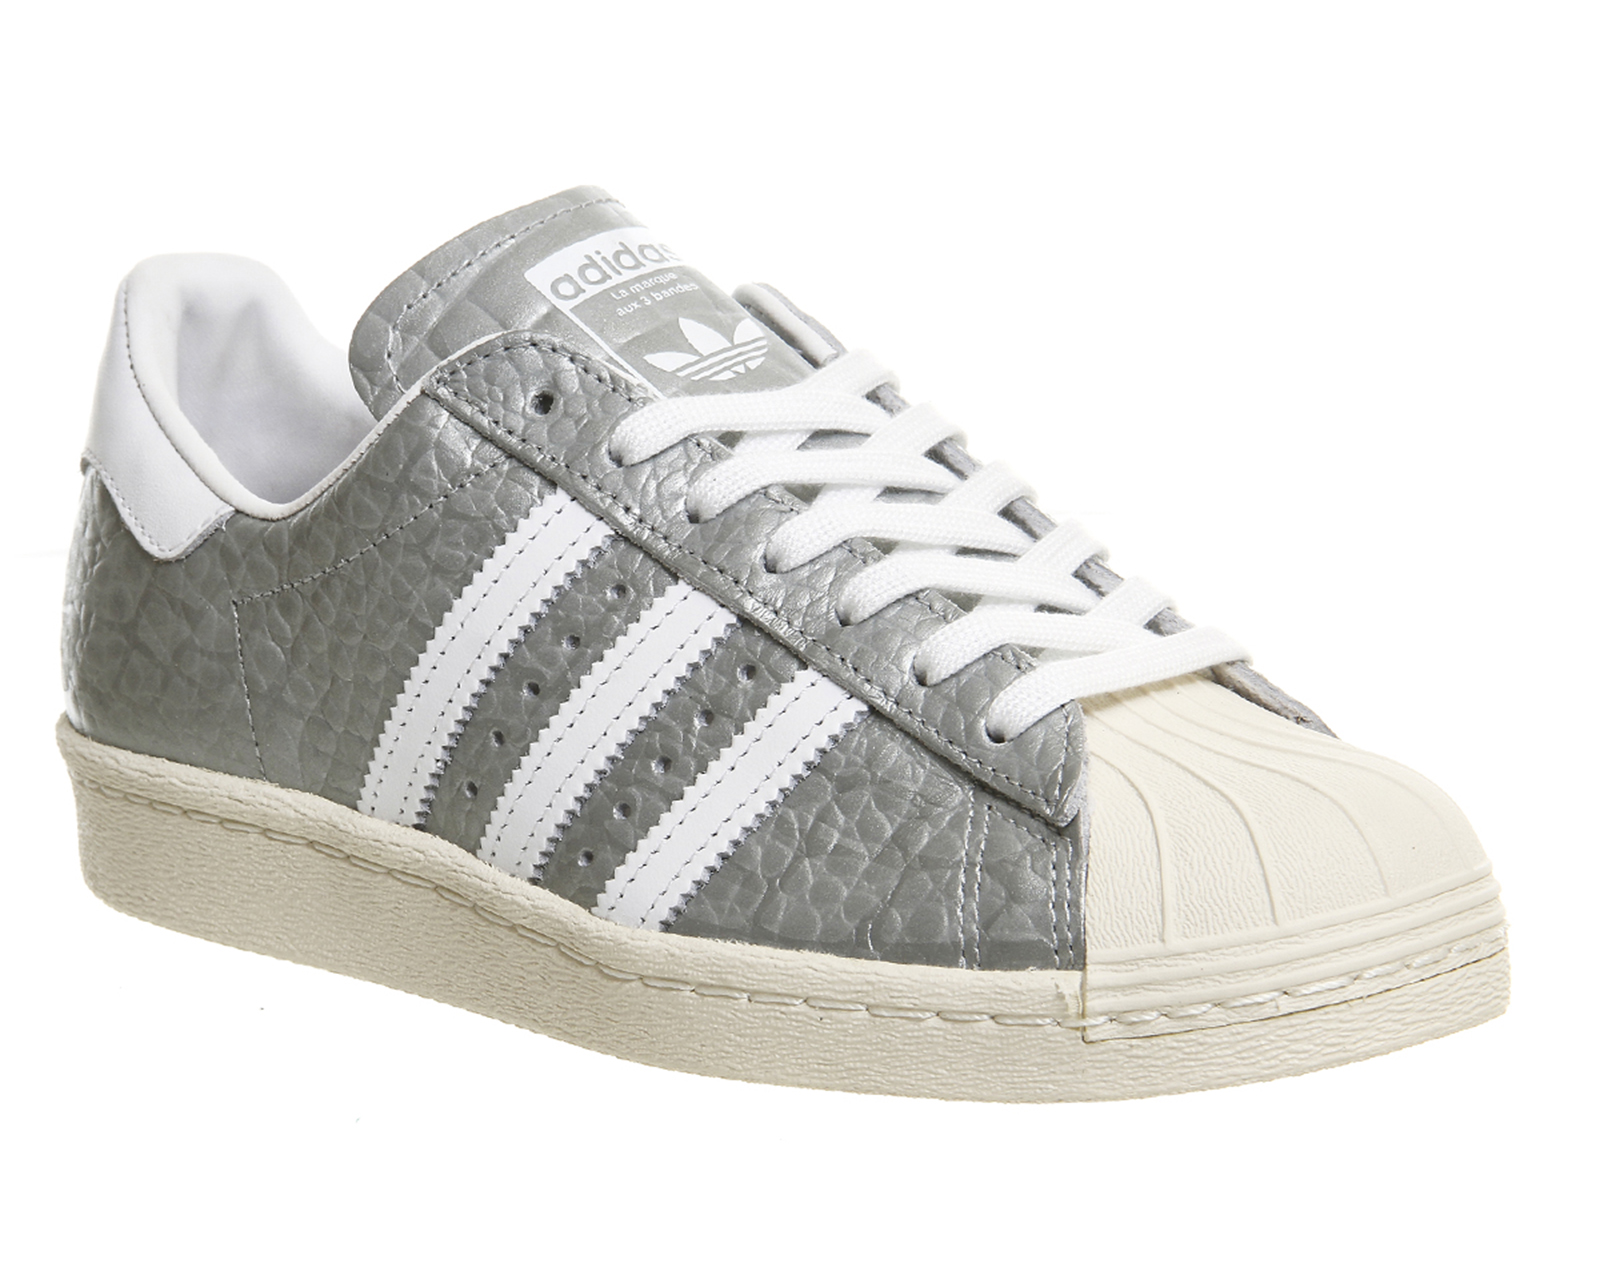 buy > adidas superstar silver metallic 38, Up to 68% OFF